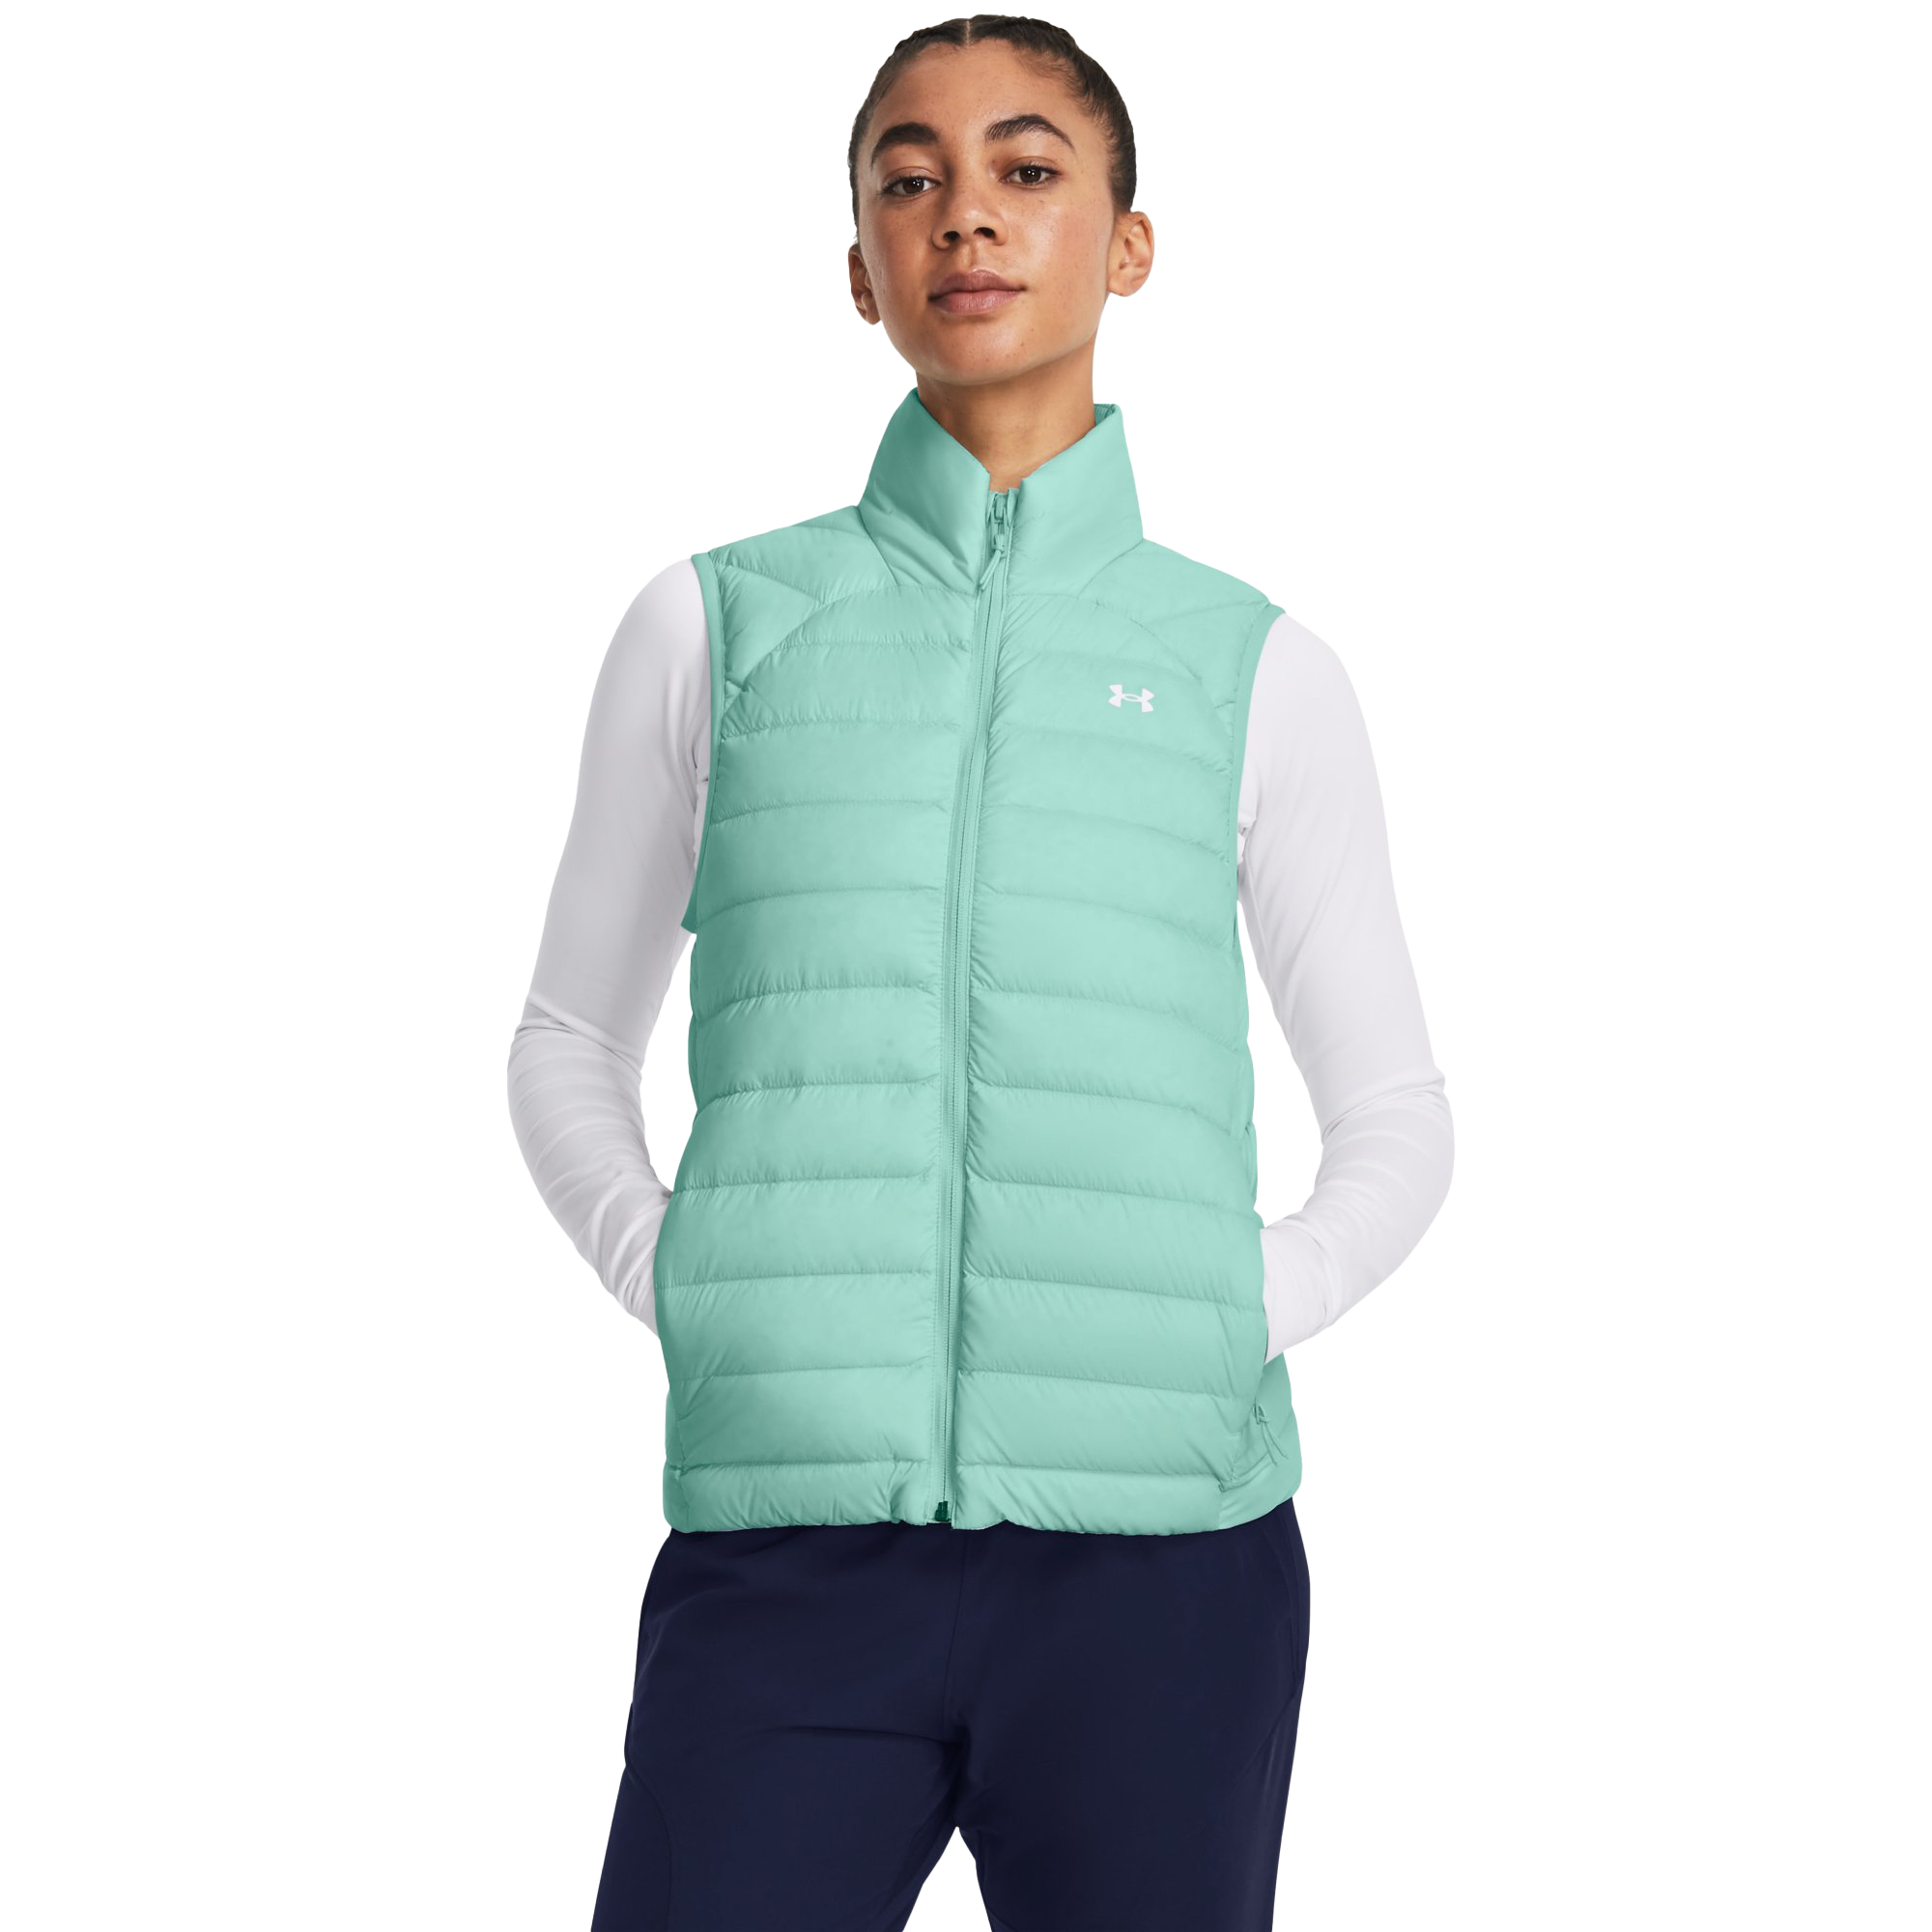 Under Armour Storm Armour Down 2.0 Vest for Ladies - Neo Turquoise/White - S